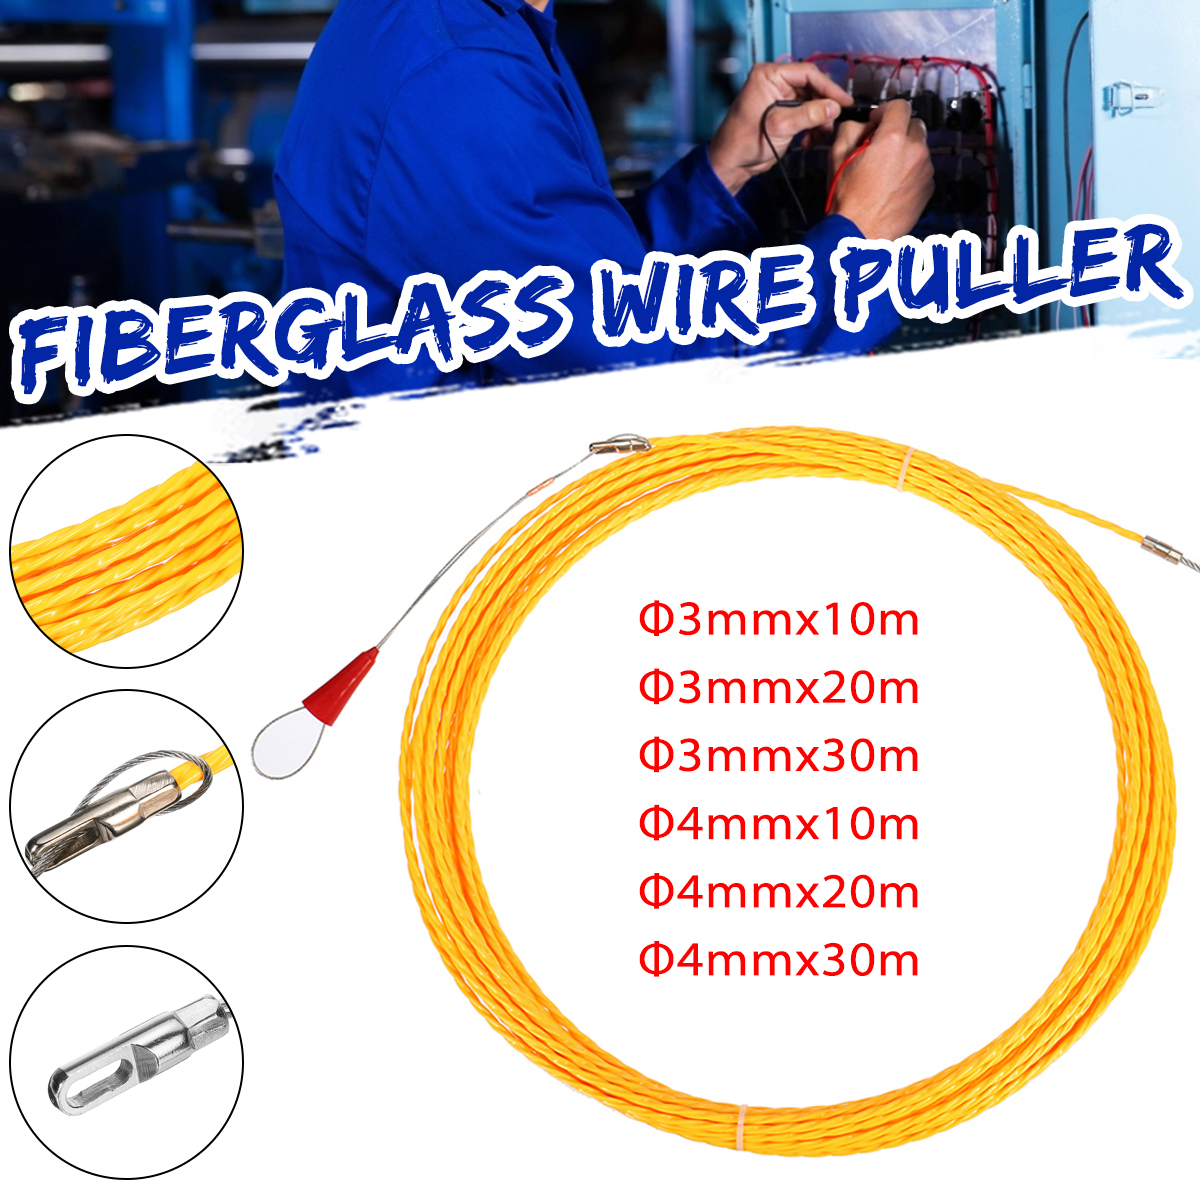 102030m-Length-x-34mm-Dia-Fiberglass-Wire-Cable-Puller-Tube-Piercing-Device-Fiberglass-Cable-Puller-1794744-1